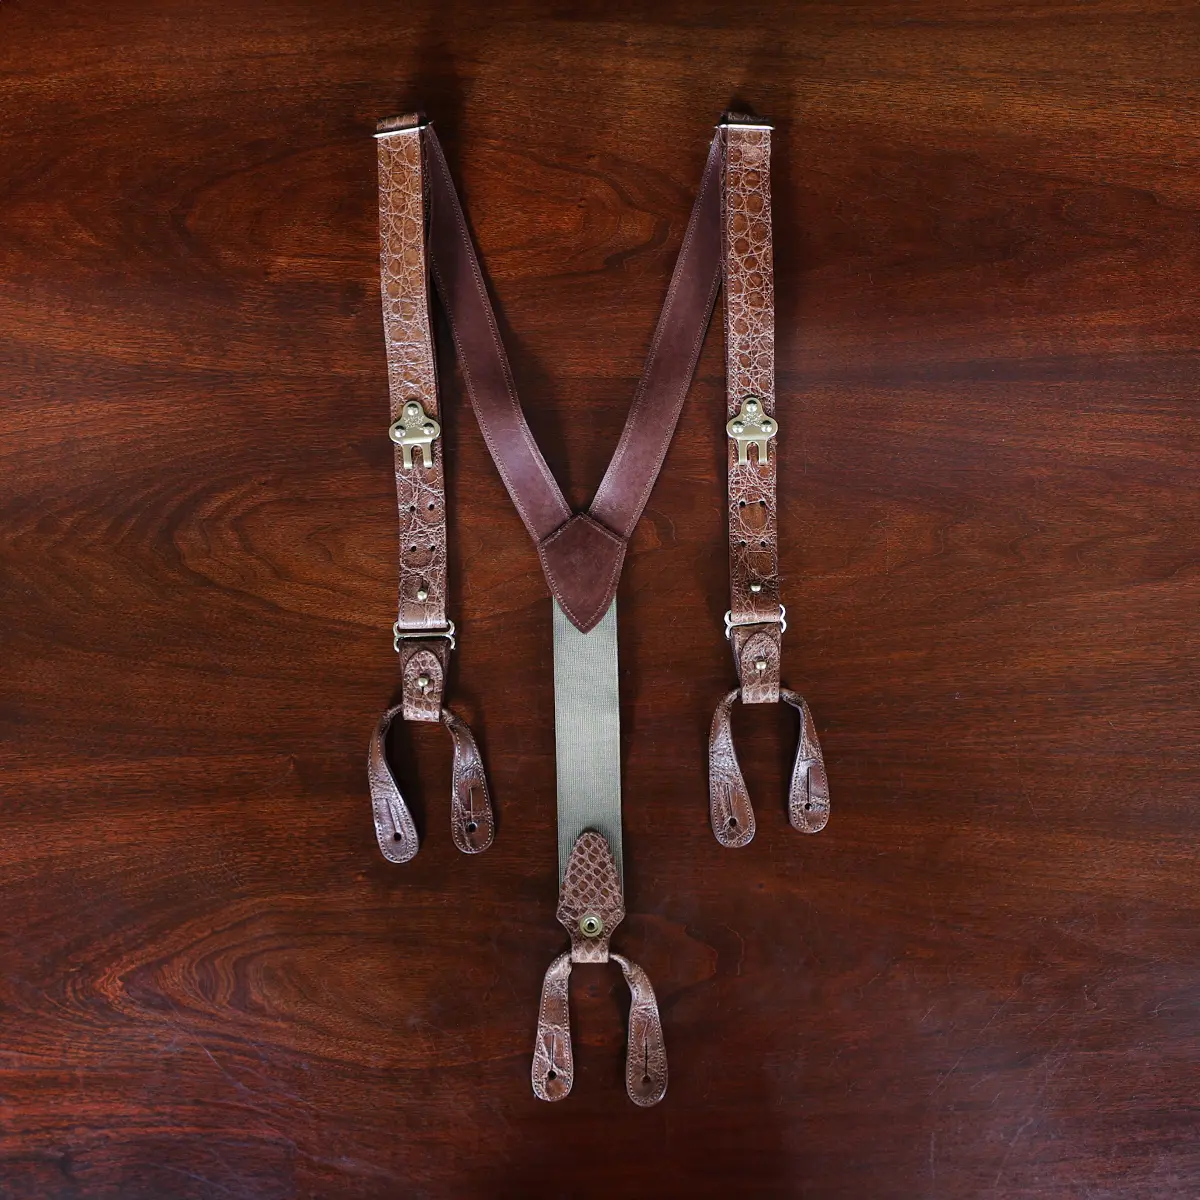 no 3 leather alligator suspenders on wood table - front view - id 001